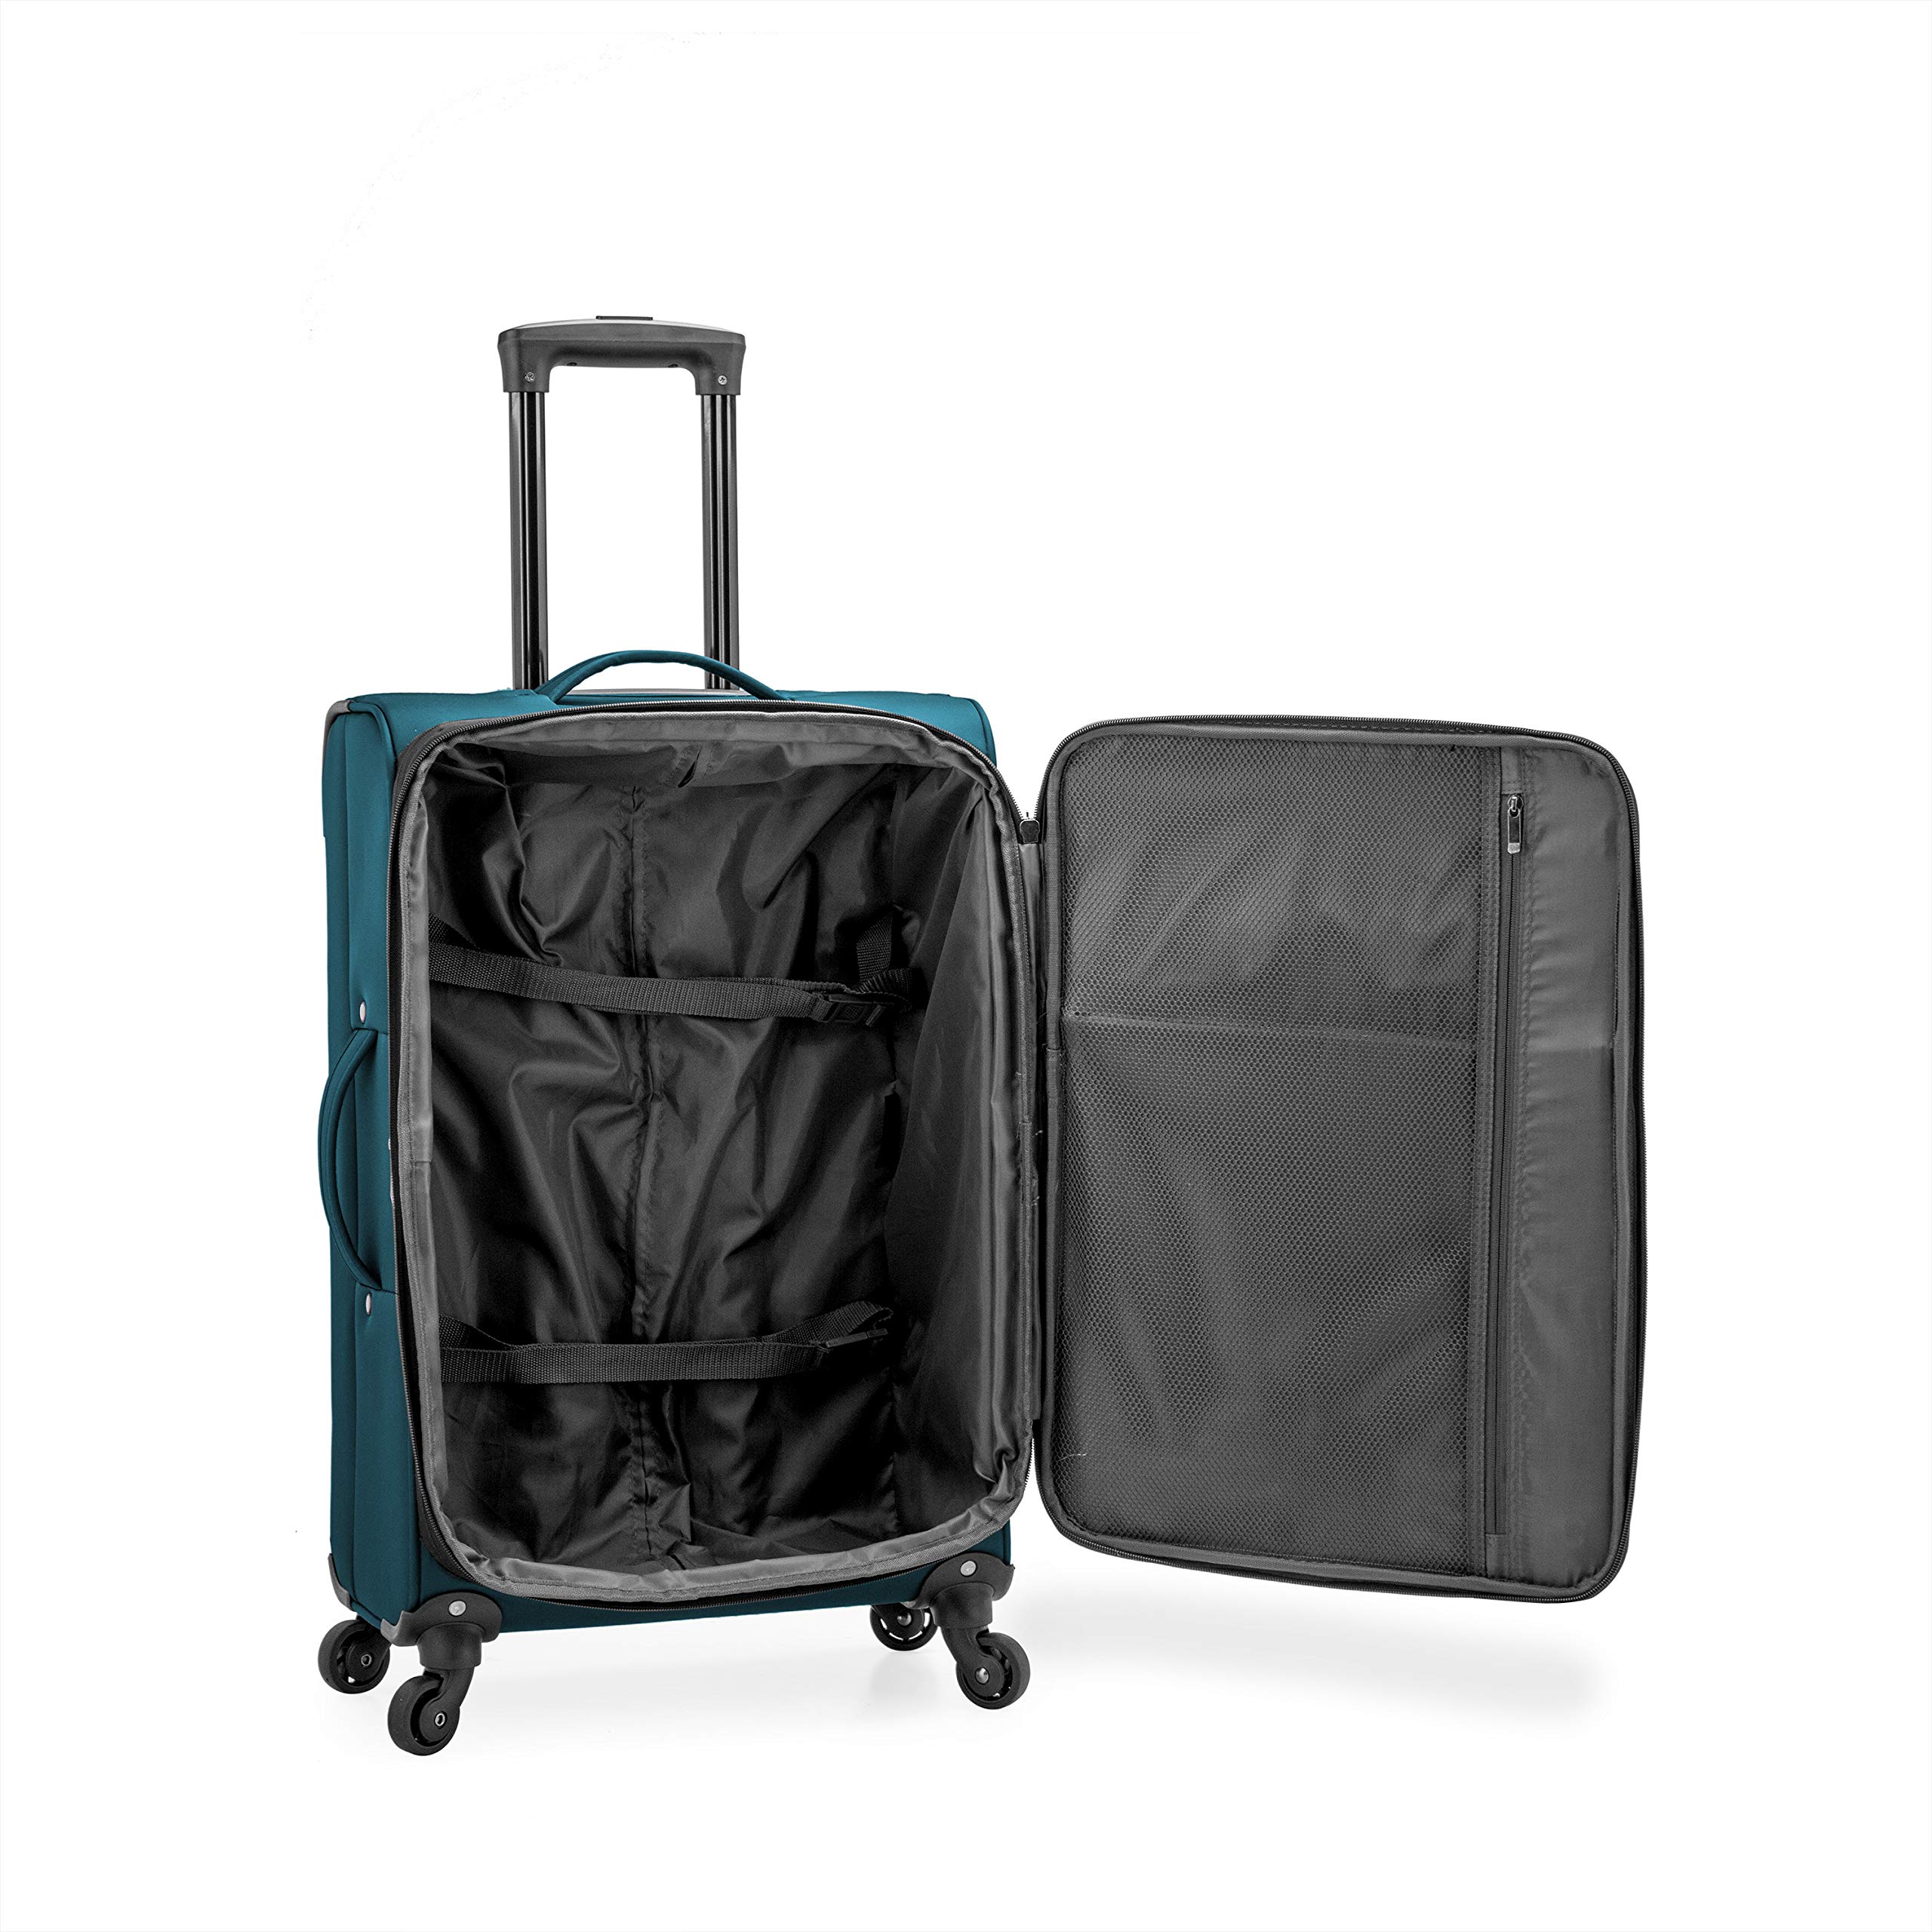 U.S. Traveler Anzio Softside Expandable Spinner Luggage, Teal, Checked-Medium 26-Inch